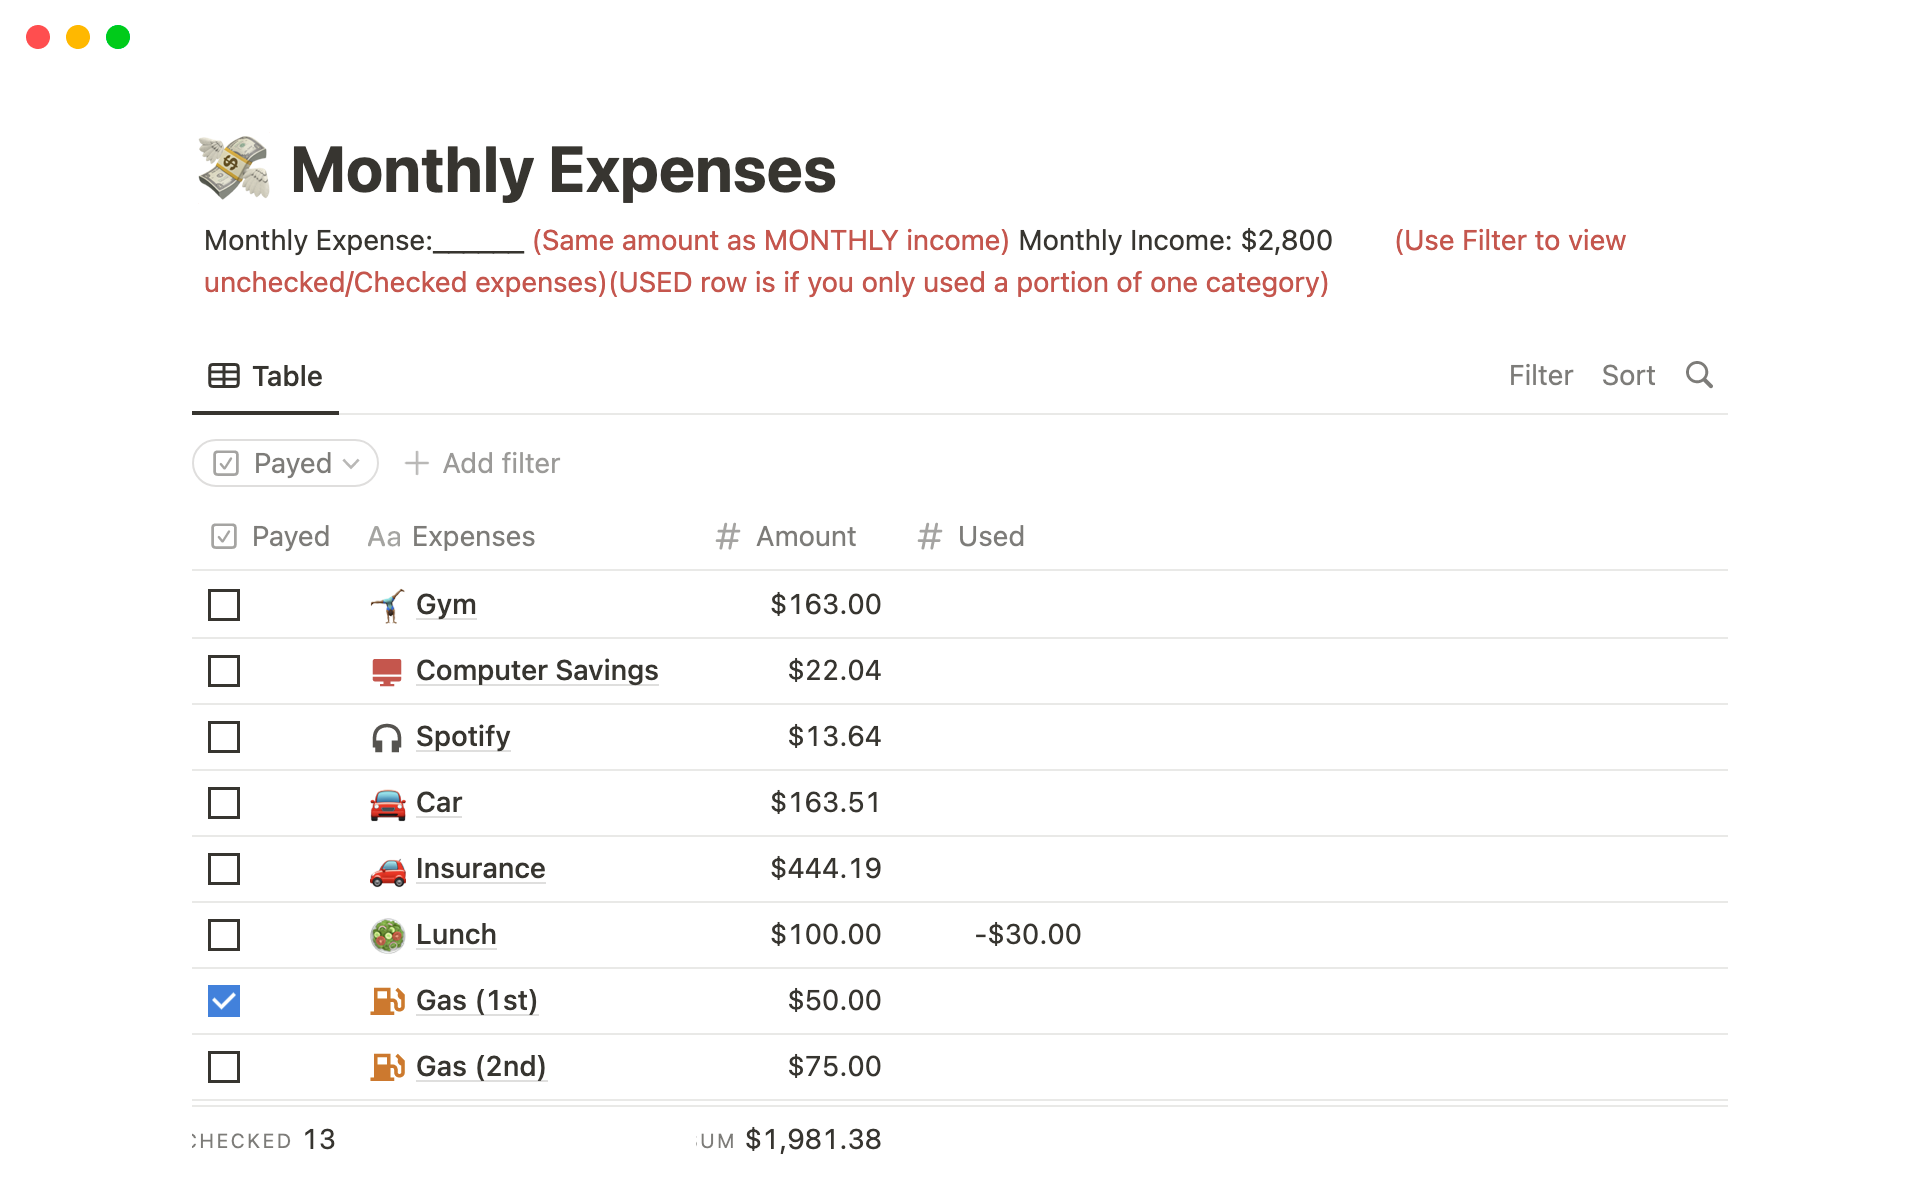 It helps you keep track of your monthly expenses in order to save